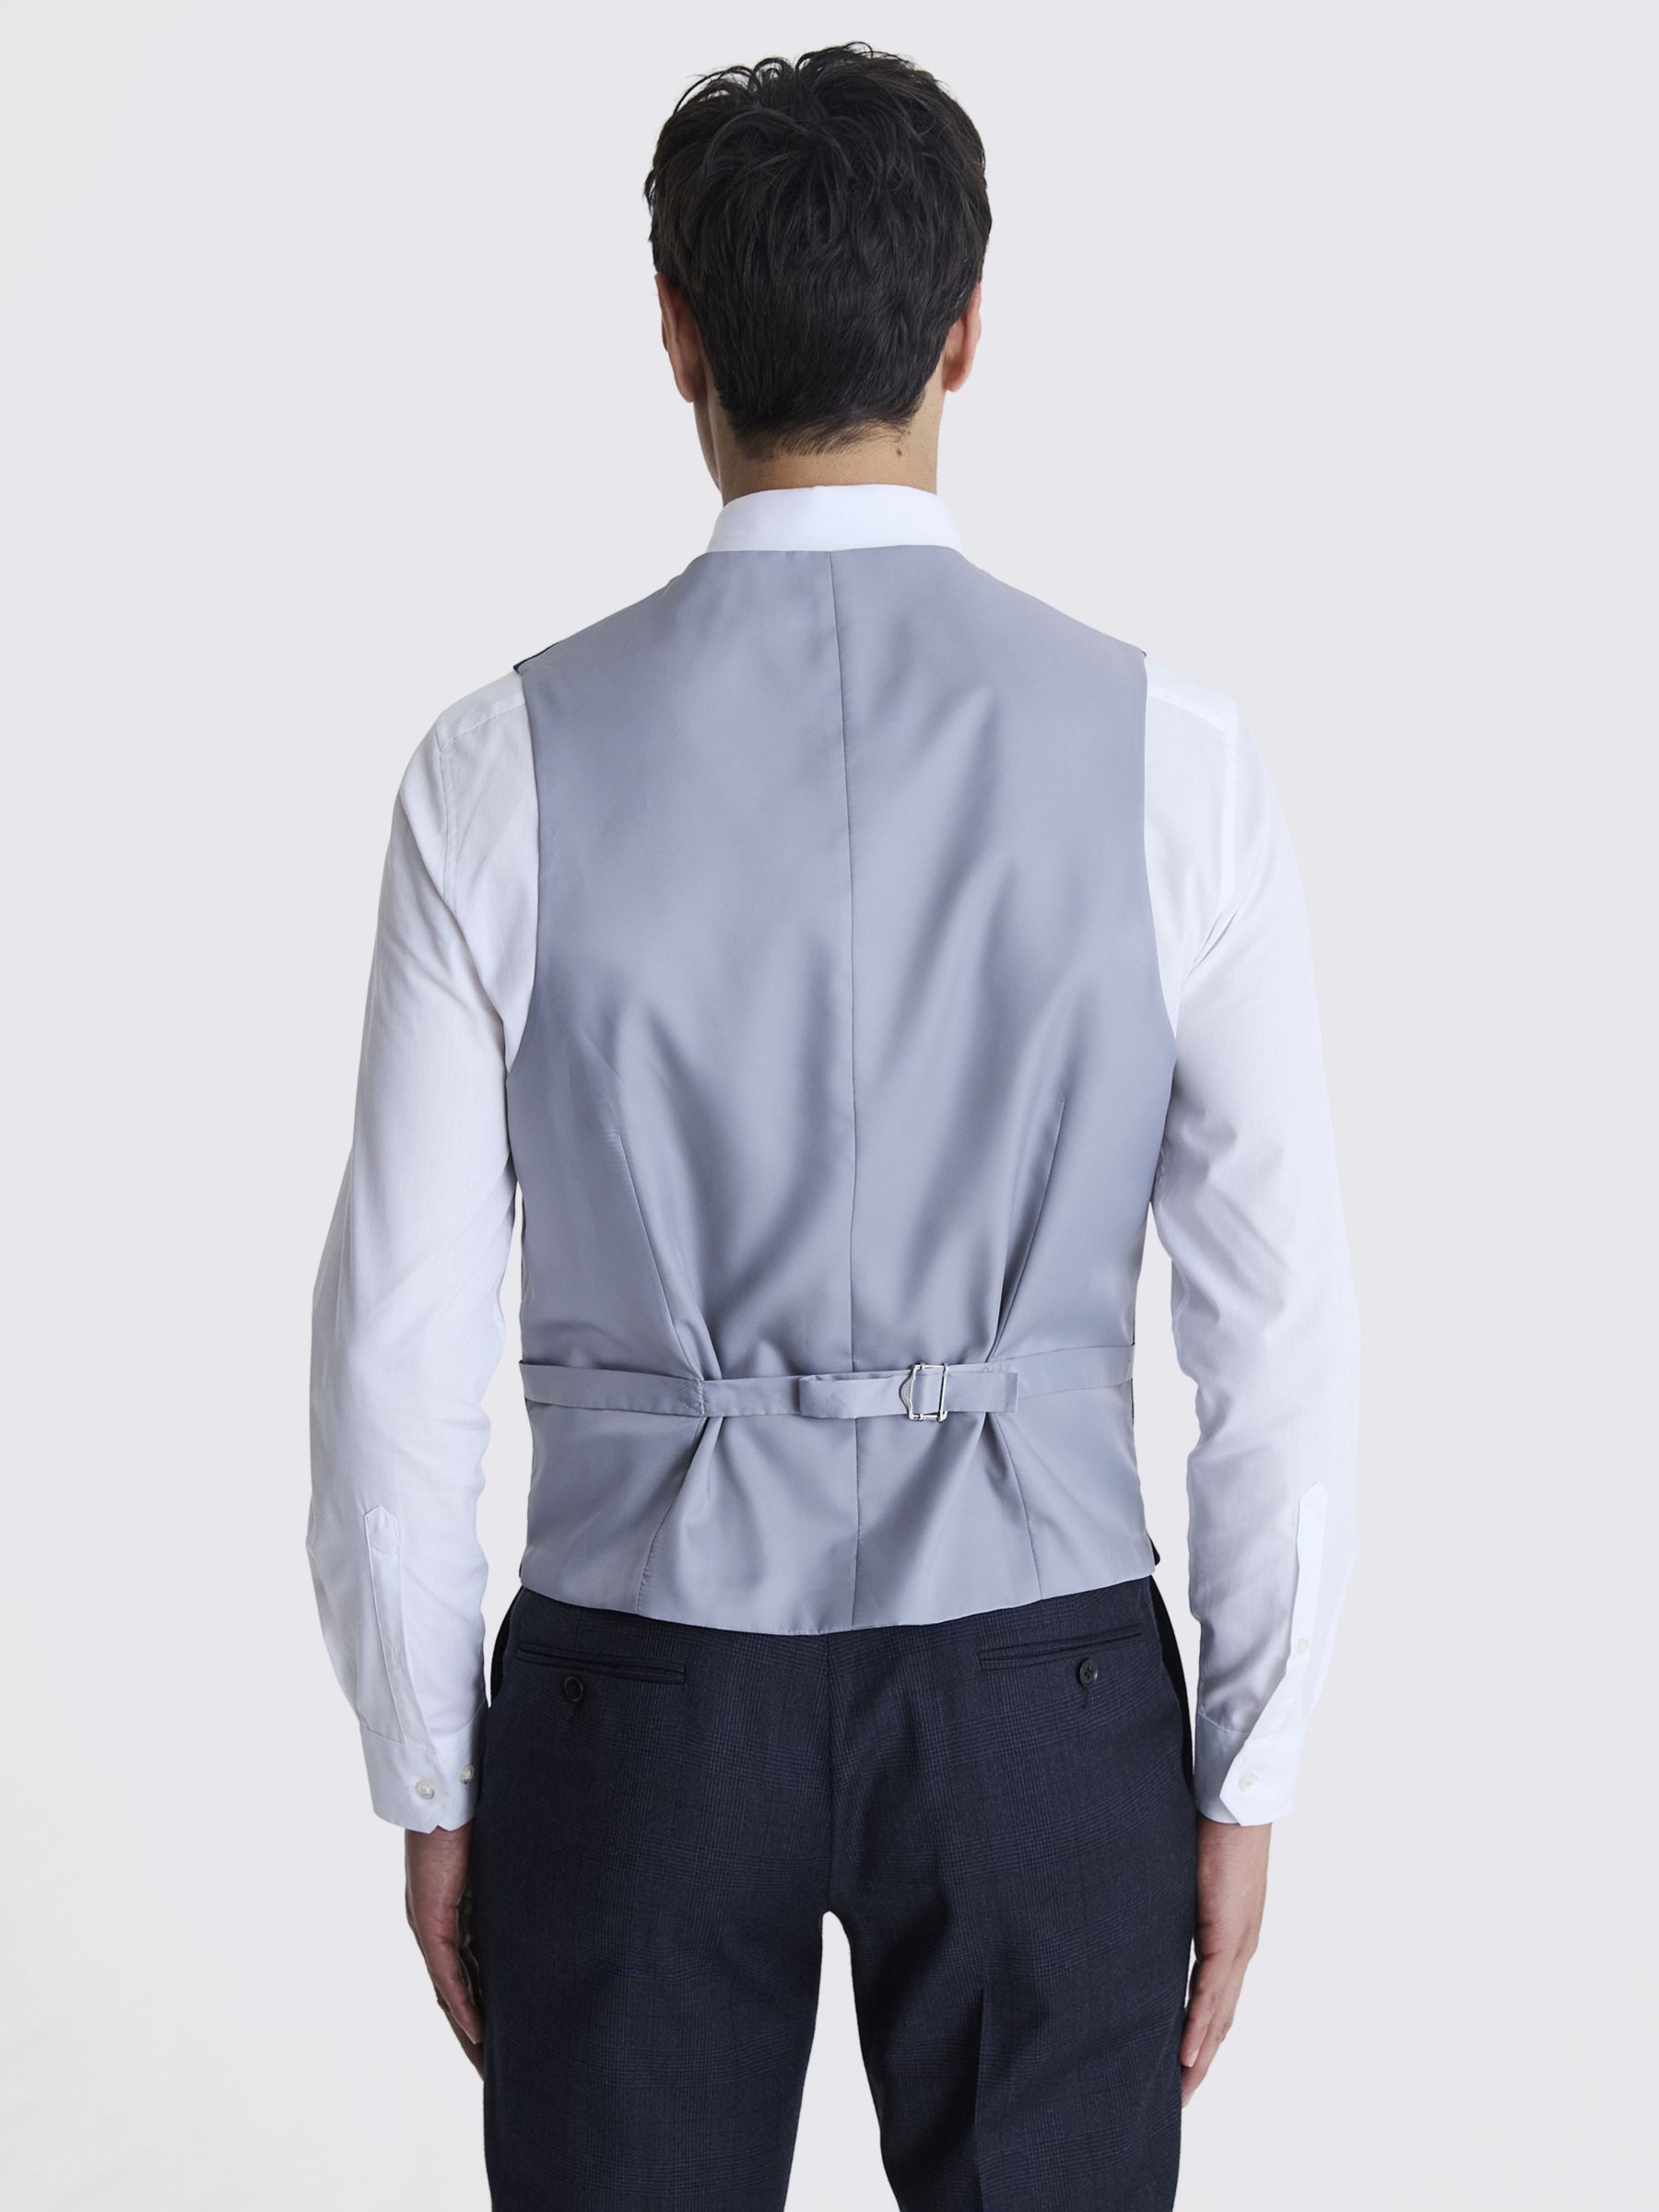 Buy Moss Tailored Fit Wool Blend Check Performance Waistcoat, Navy Online at johnlewis.com